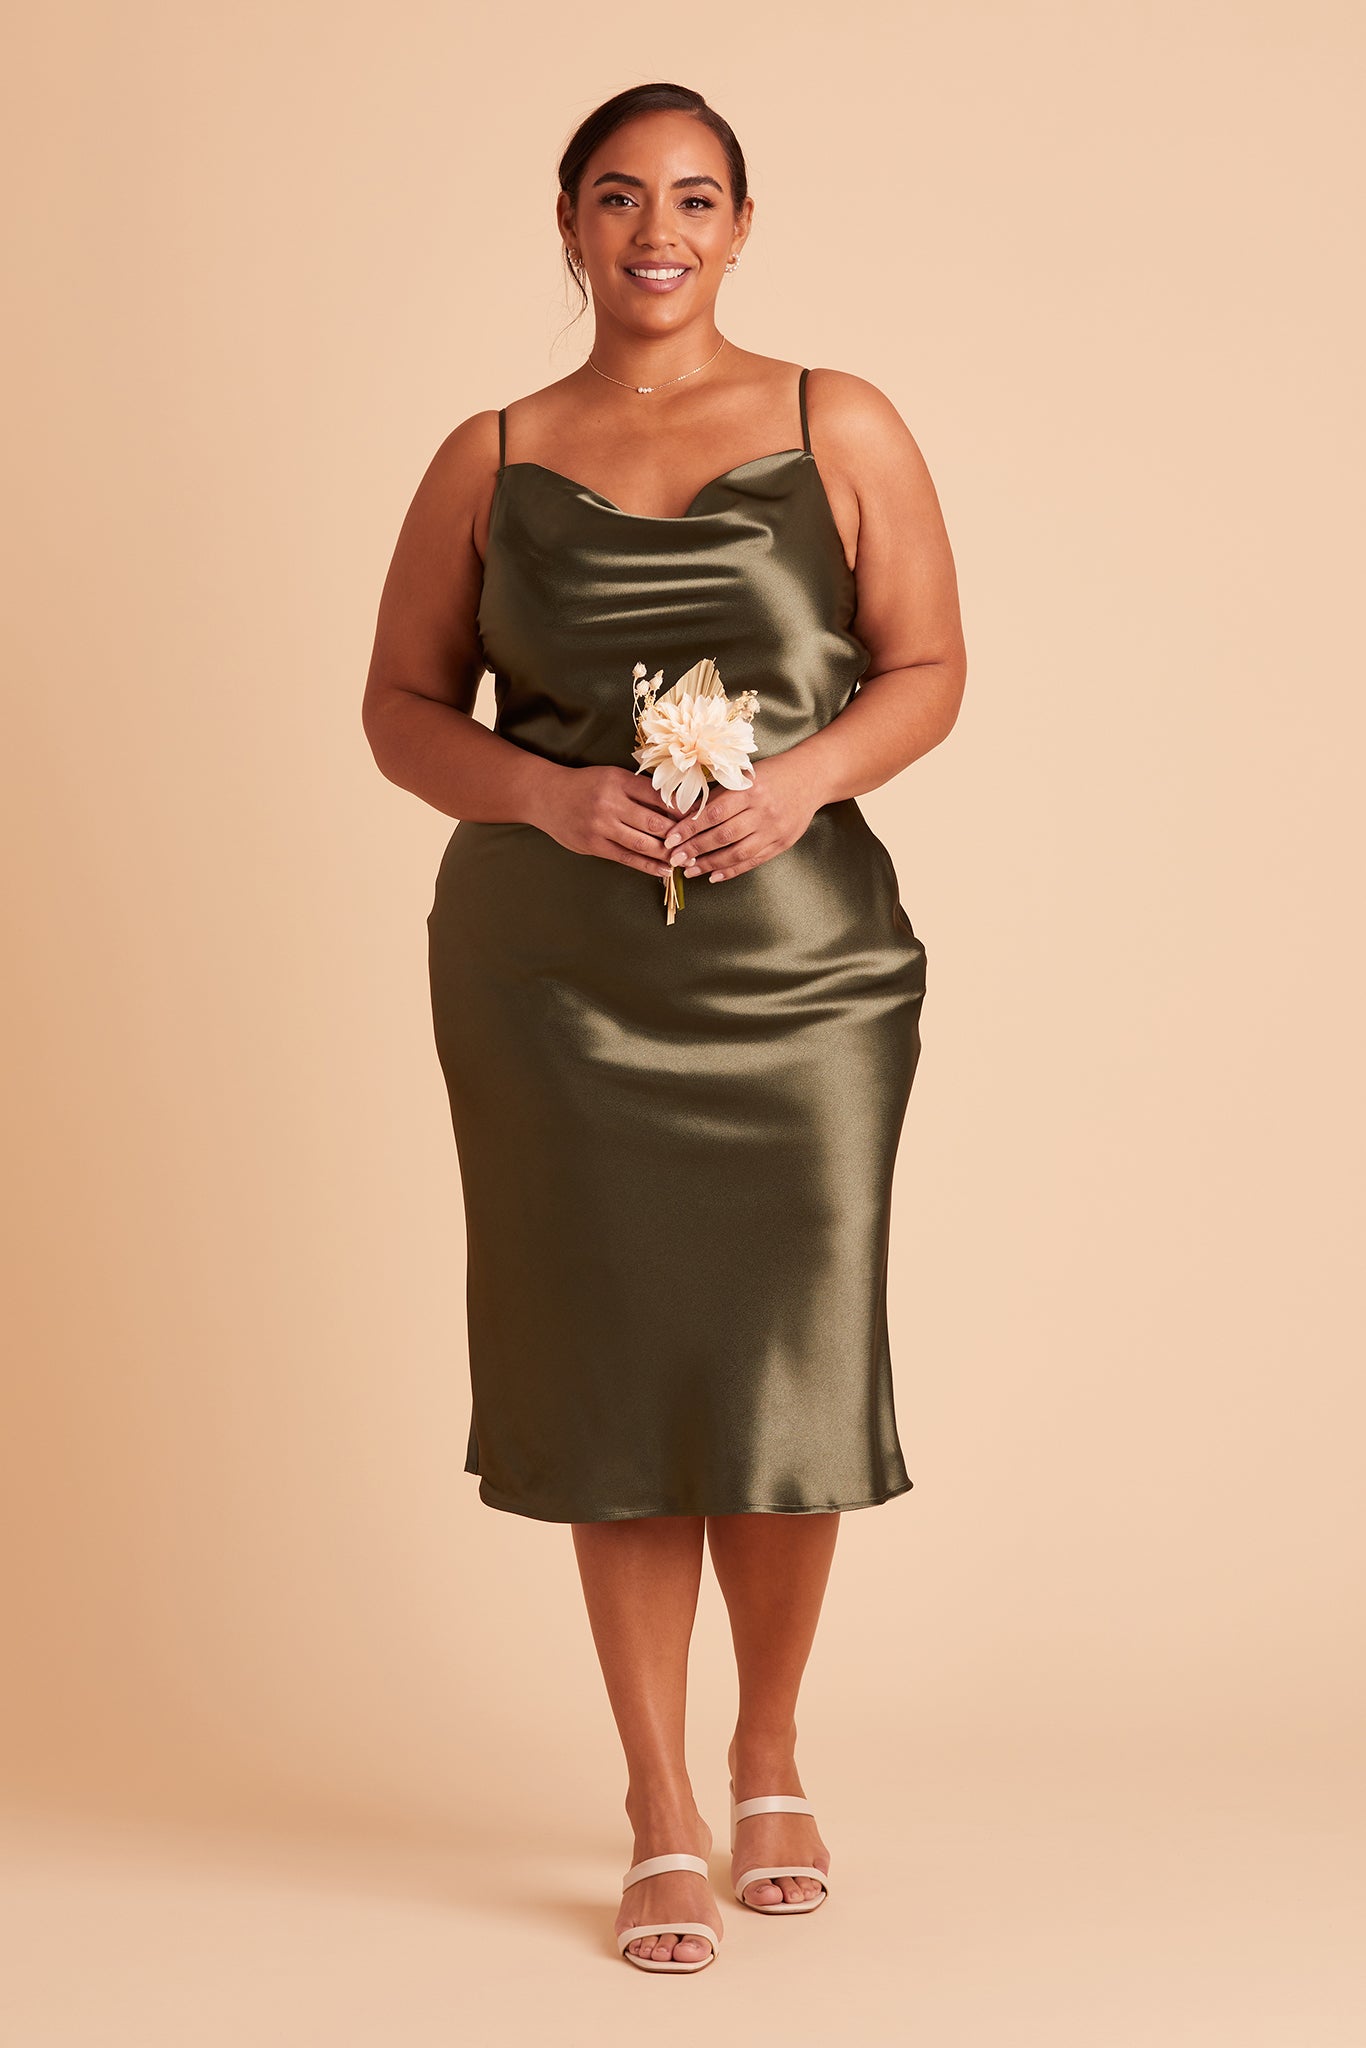 Lisa midi plus size bridesmaid dress in olive satin by Birdy Grey, front view